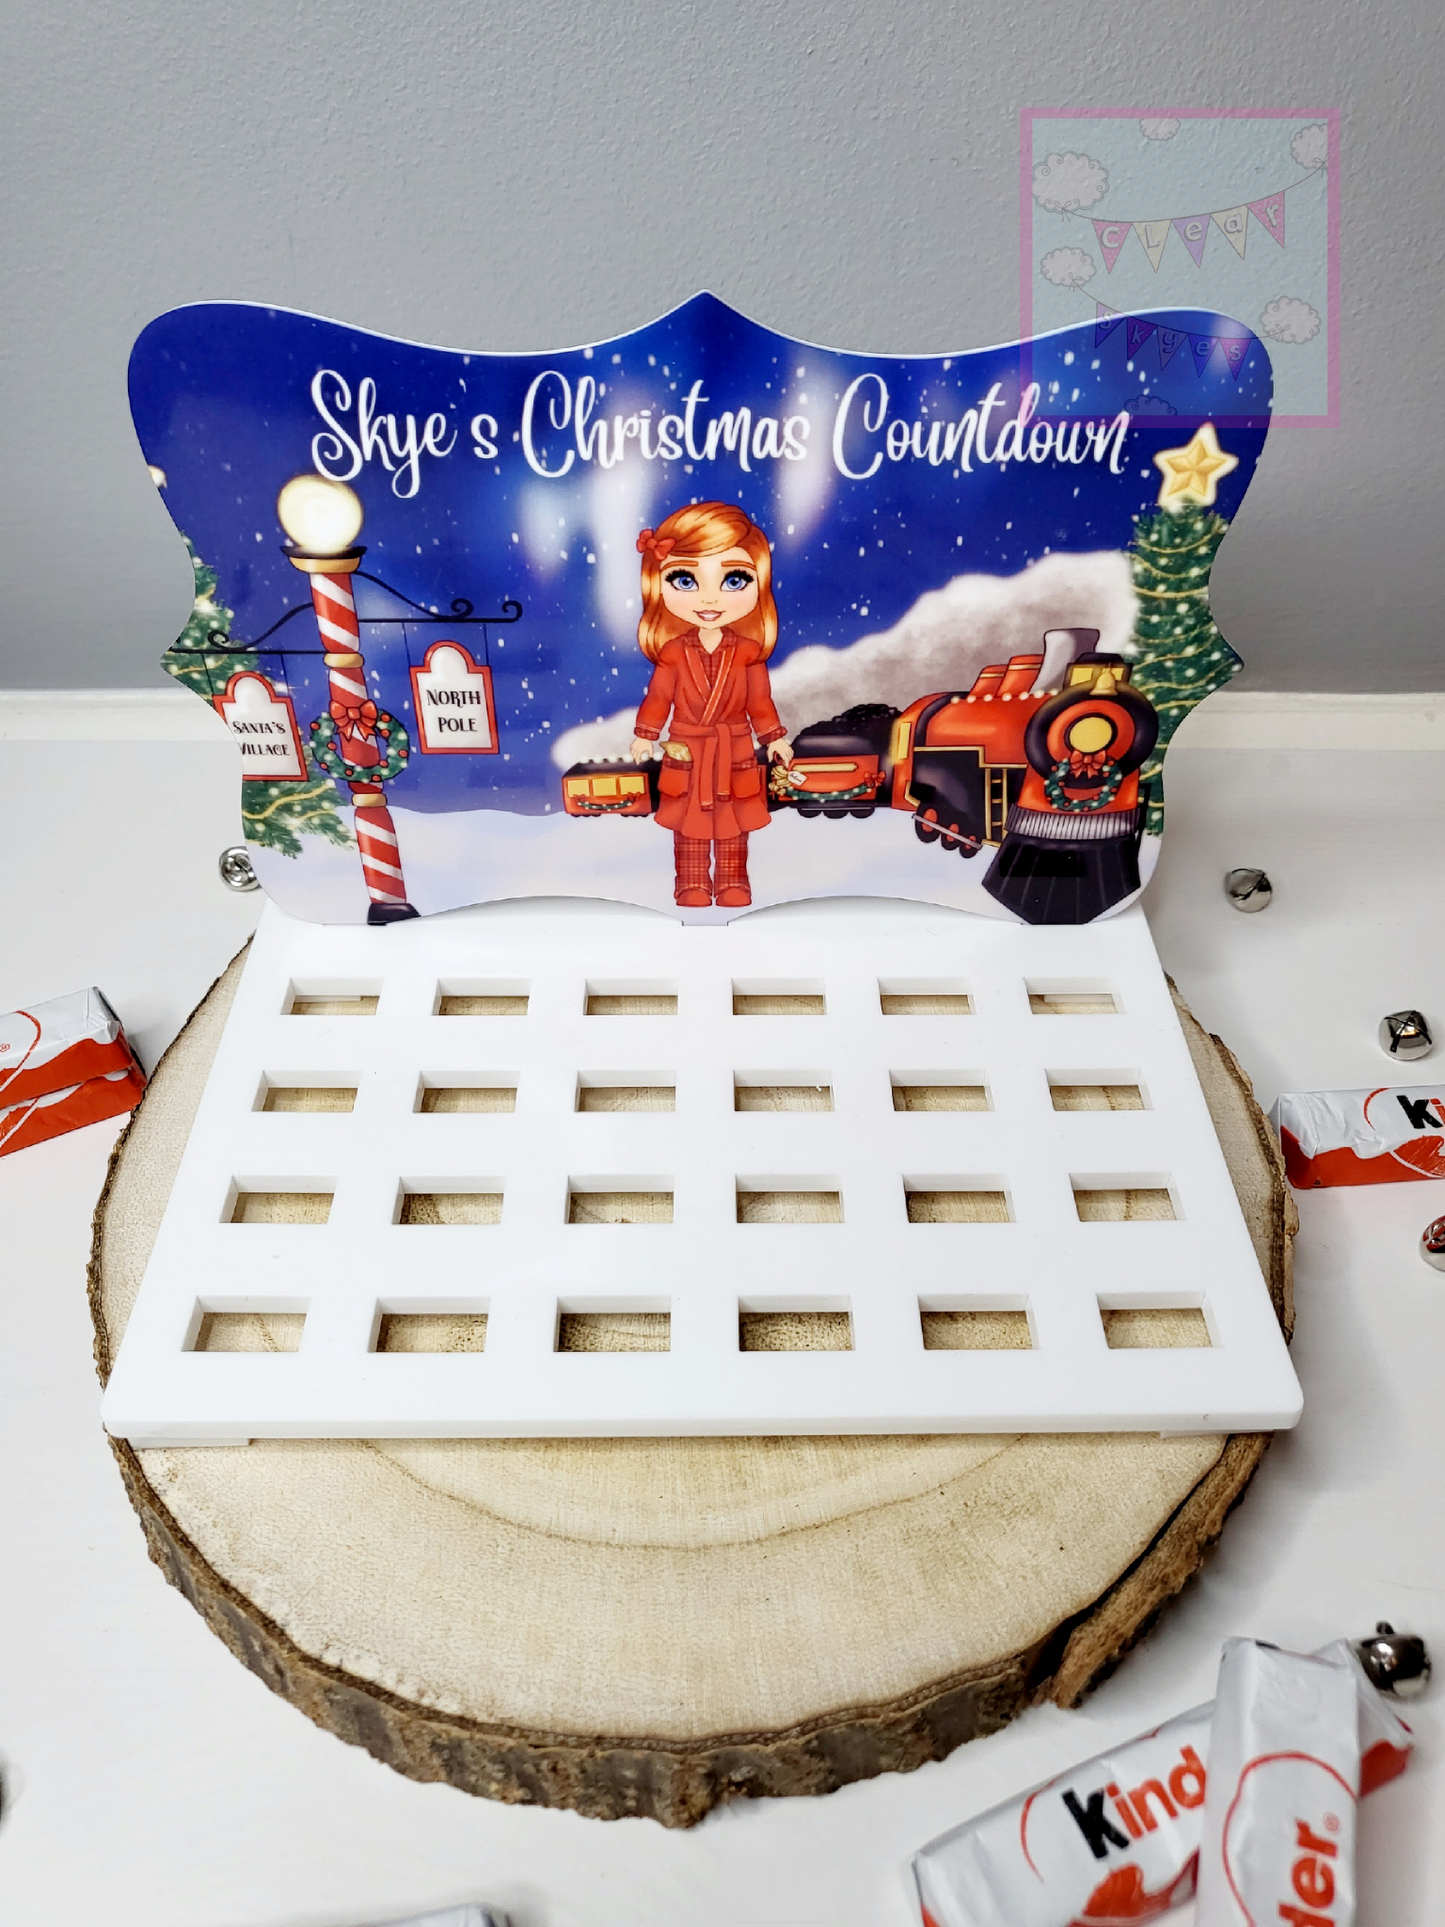 Personalised Christmas Advent Calendar - Kinder or Coins